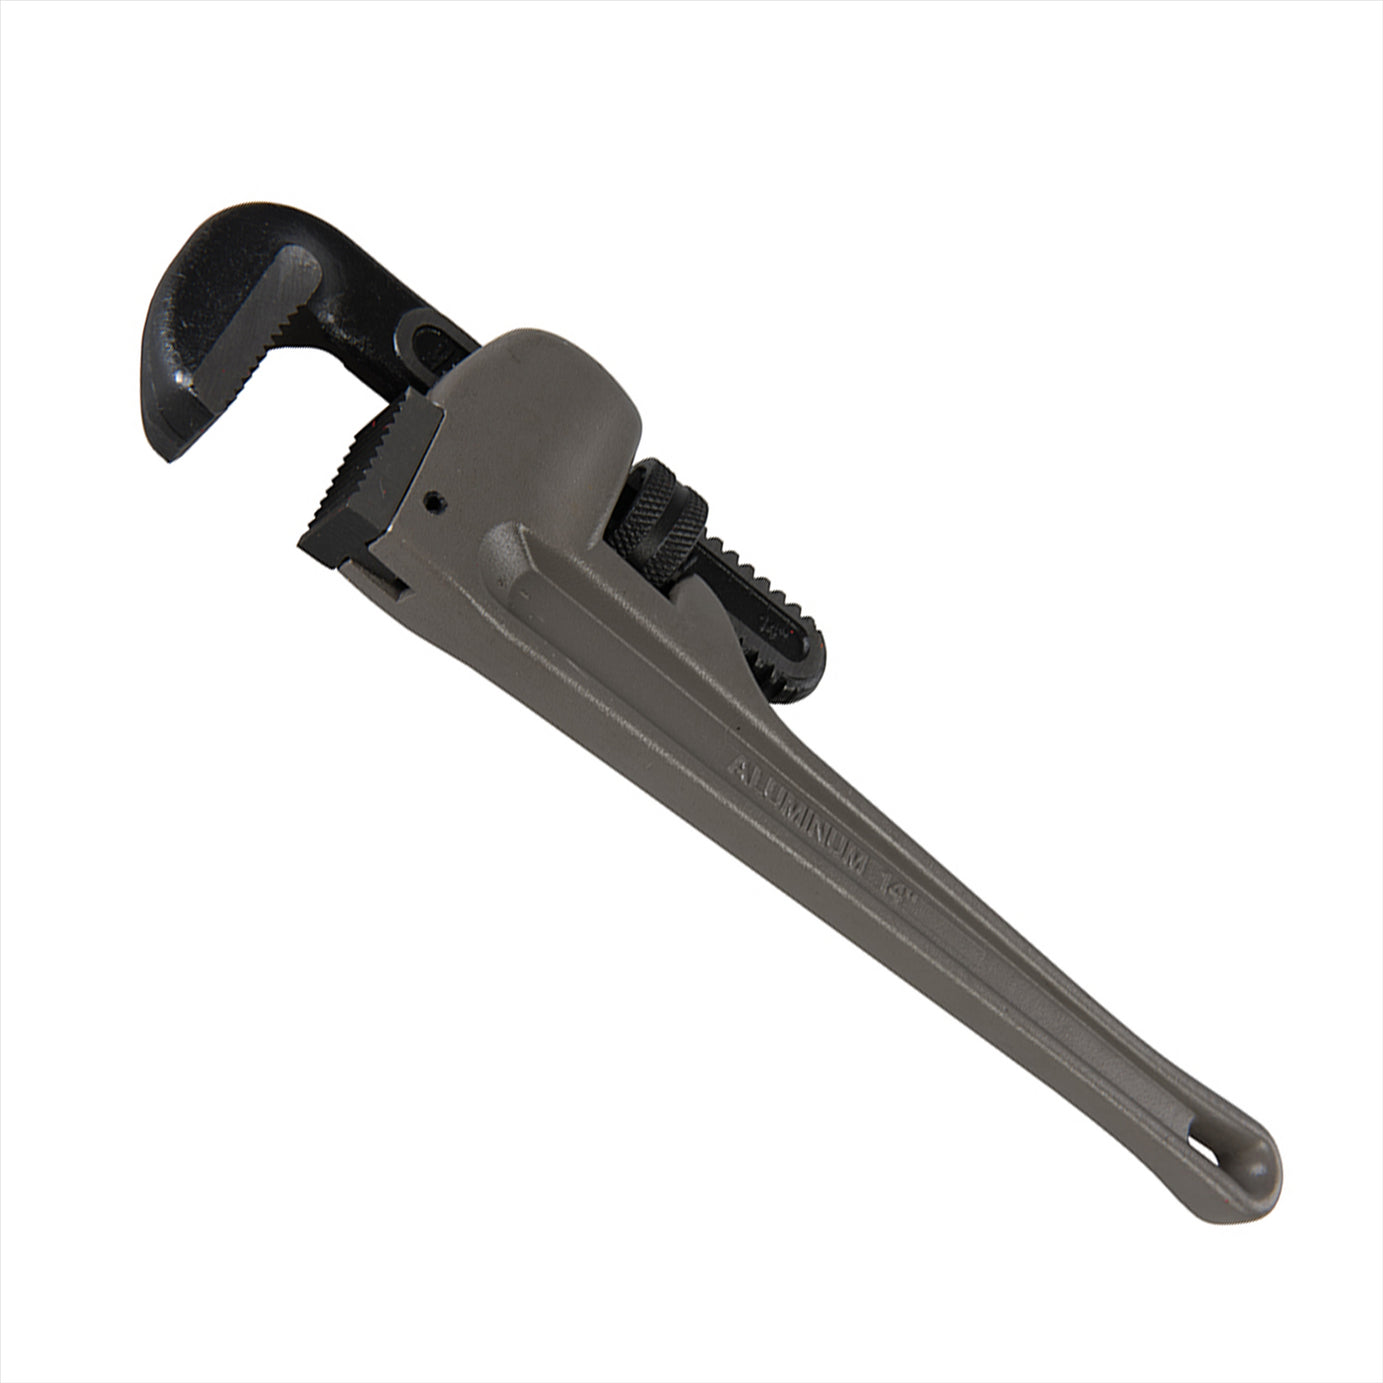 Aluminium Pipe Wrench Corossion Resistant With Rippled Powder Coating 610mm/24"